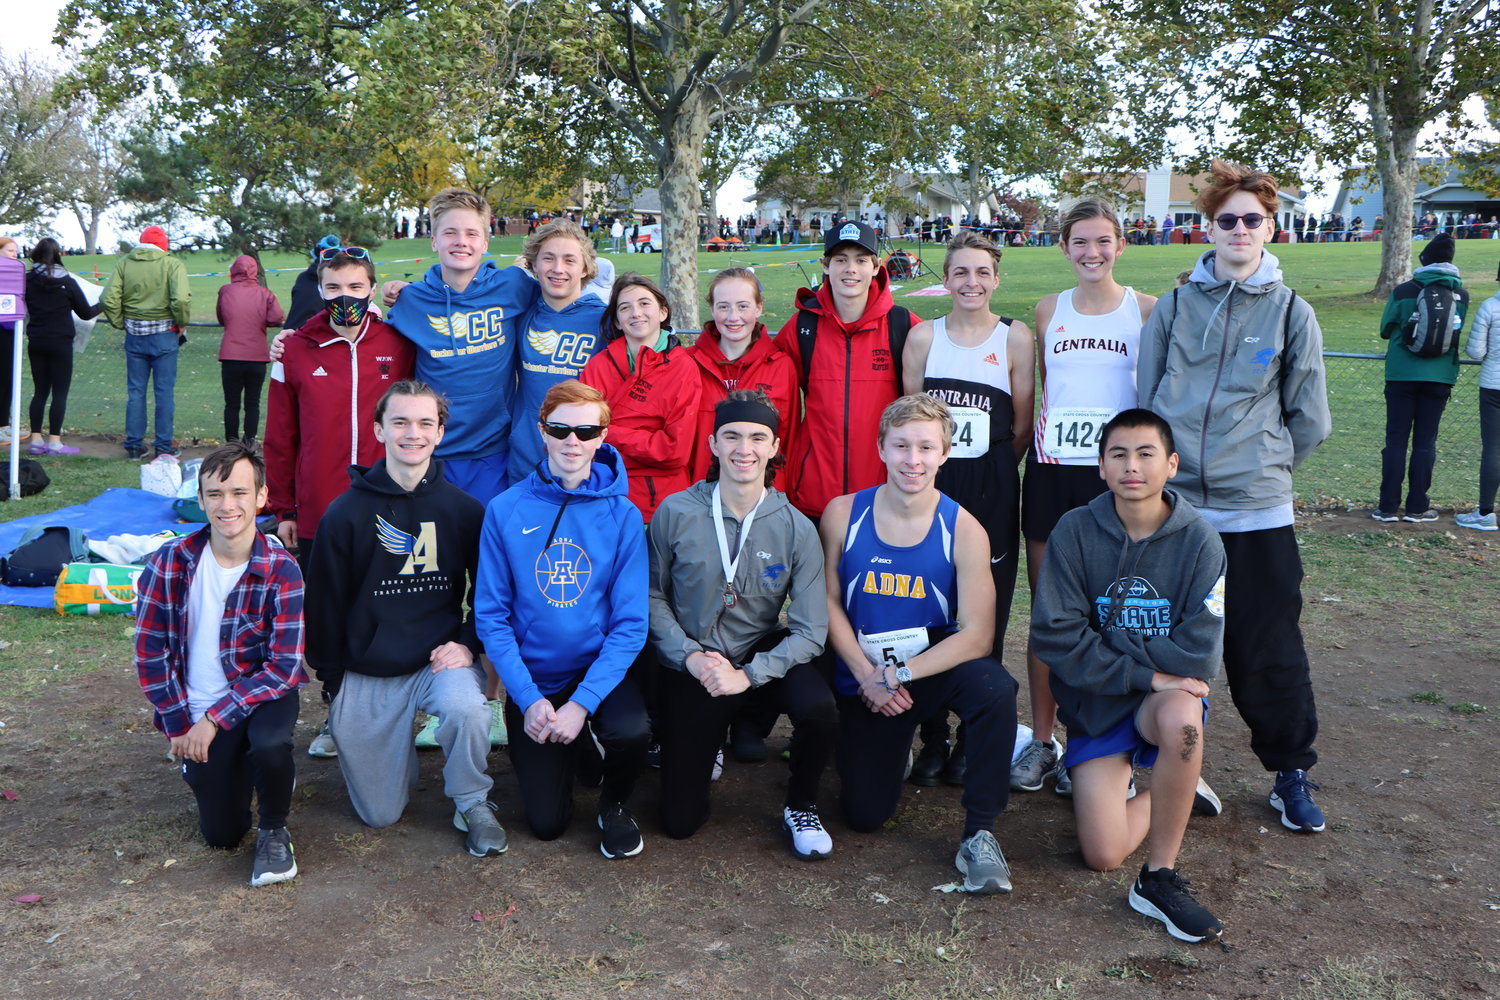 Area runners from local schools pose for a photo at the State Cross Country Championships in Pasco Nov. 5. Front Row from left to right (all from Adna): Davonte Robinson, Kolton Moon, Zane Powell, Jordan Stout, Nate Scheuber and Raul Torres-Rodriguez. Back Row from left to right: Jaysen Miles (W.F. West), Gunnar Morgan (Rochester), Taydee Evenstar (Rochester), Haylee Huber (Tenino), Brynn Williams (Tenino), Tristan VonBargen (Tenino), Devin Harrison (Centralia), Elyse O'Dell (Centralia) and Bailey Davis (Adna).